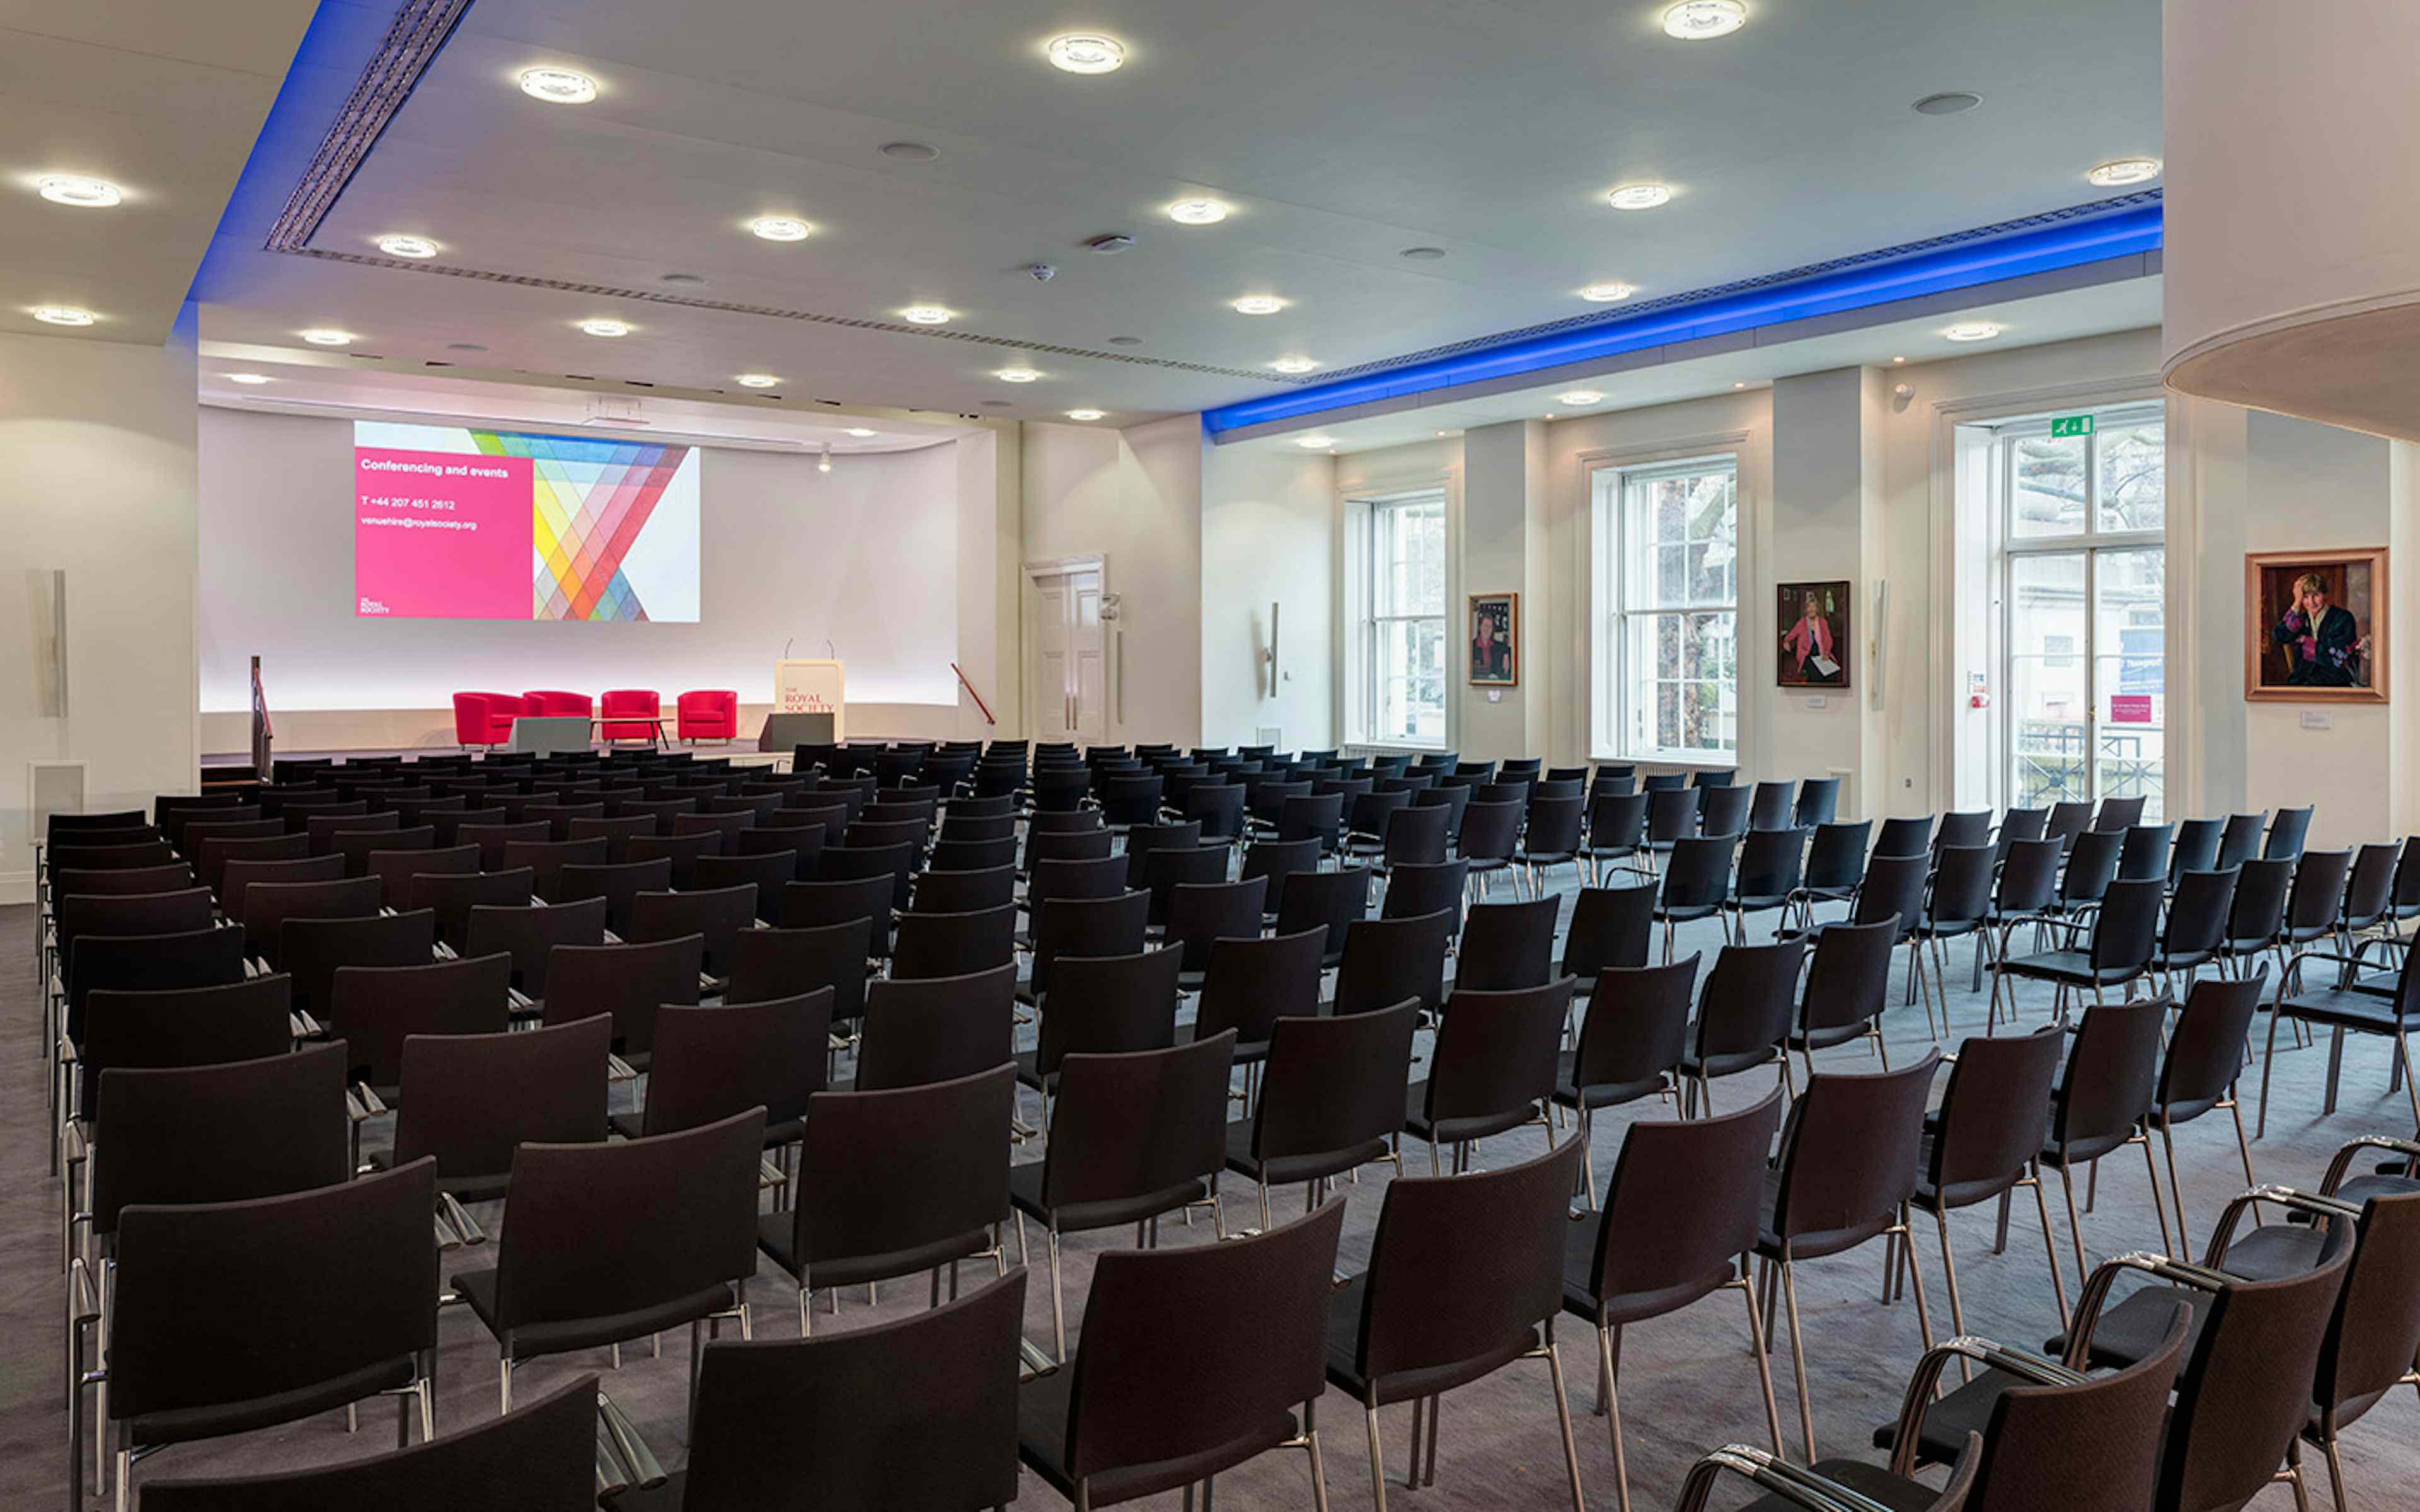 Wellcome Trust Lecture Hall and City of London Rooms  - image